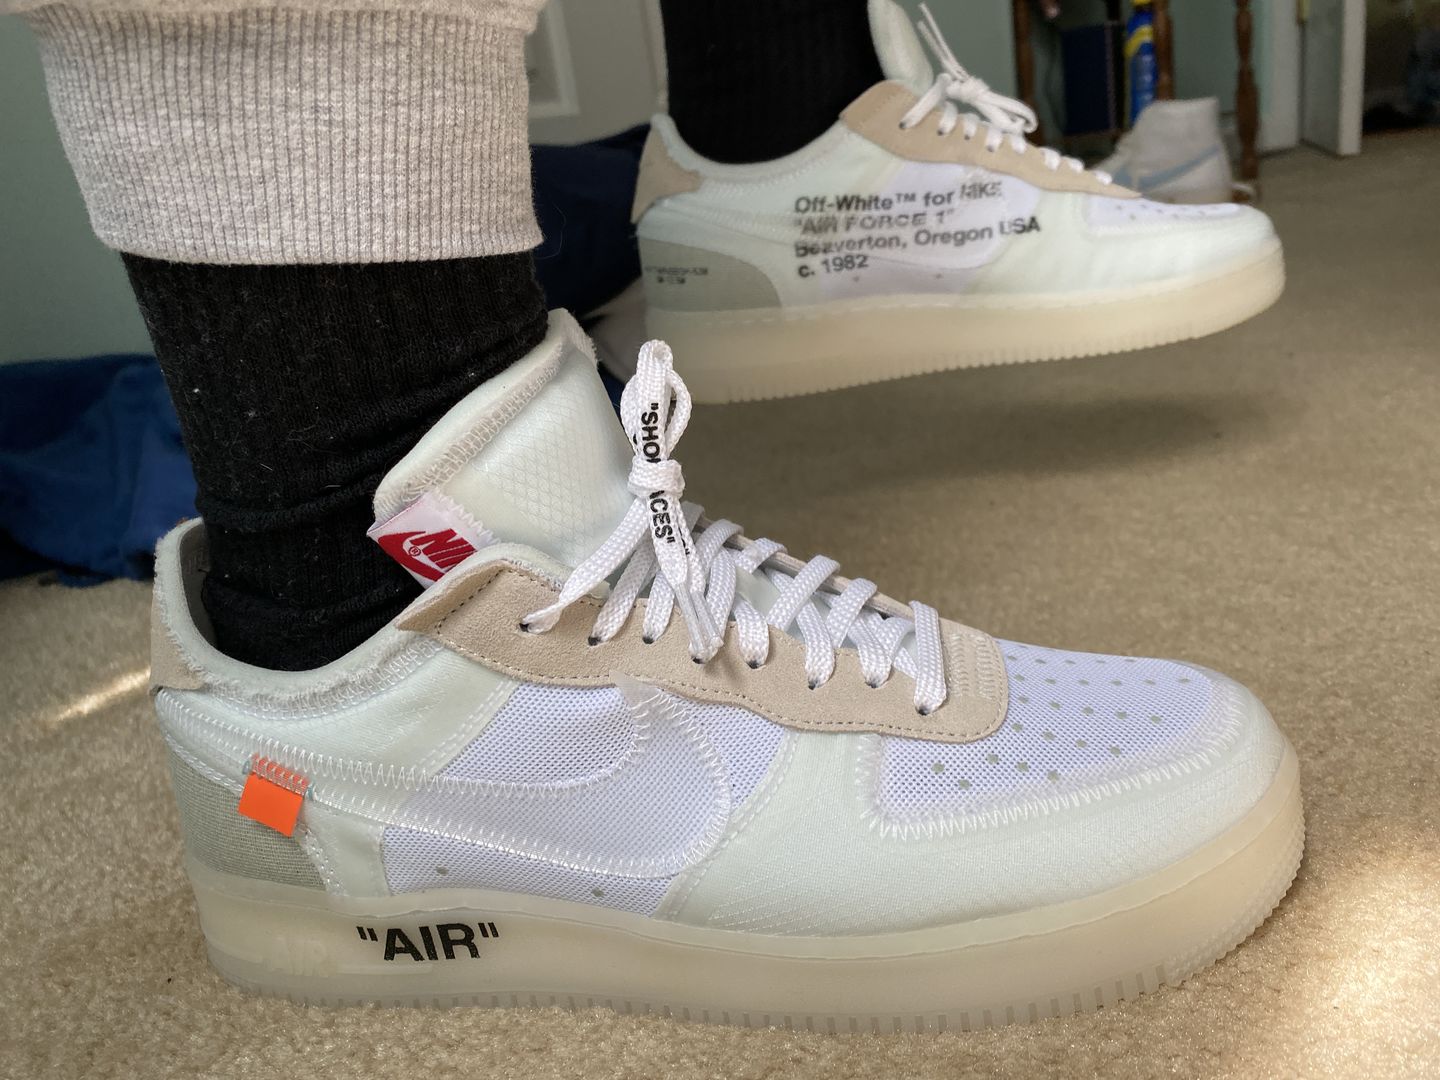 Austin G. Off-White x Nike Air Force 1 Low “The Ten”